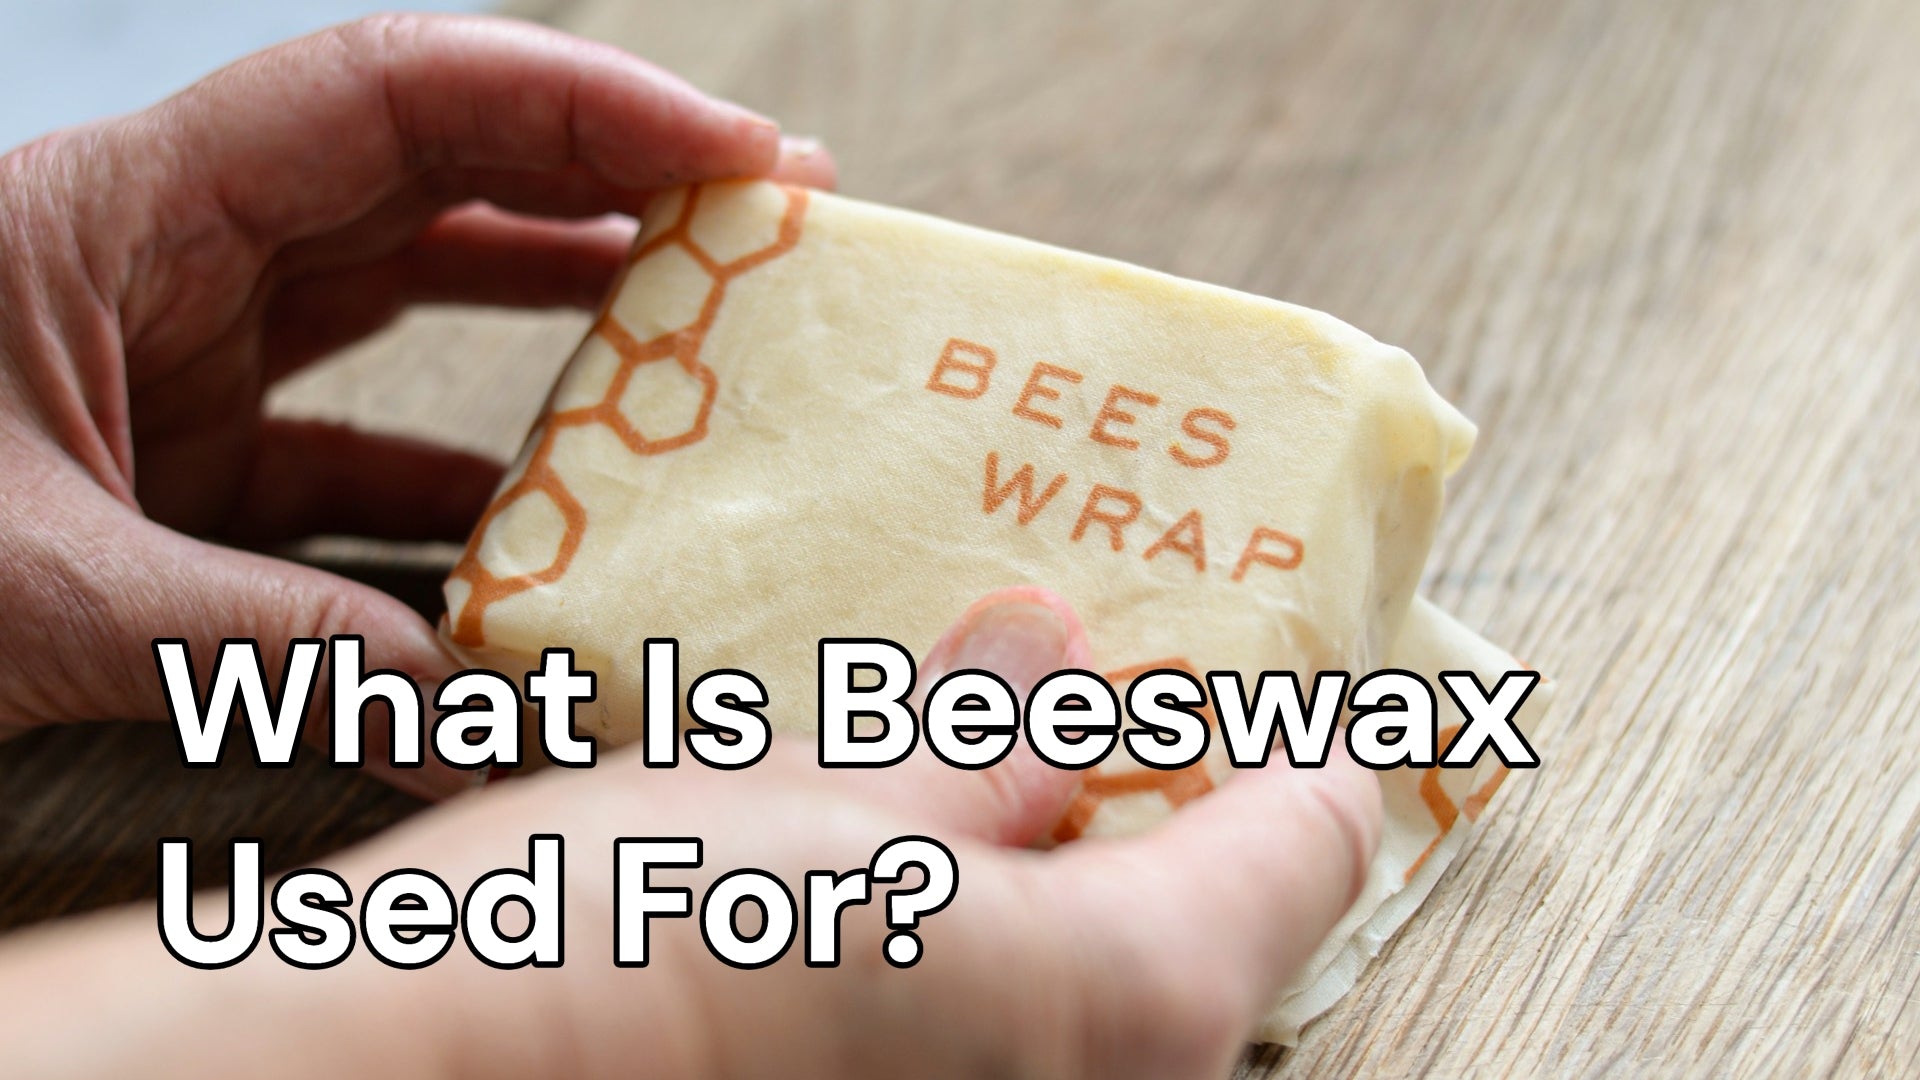 What Is Beeswax Used For?